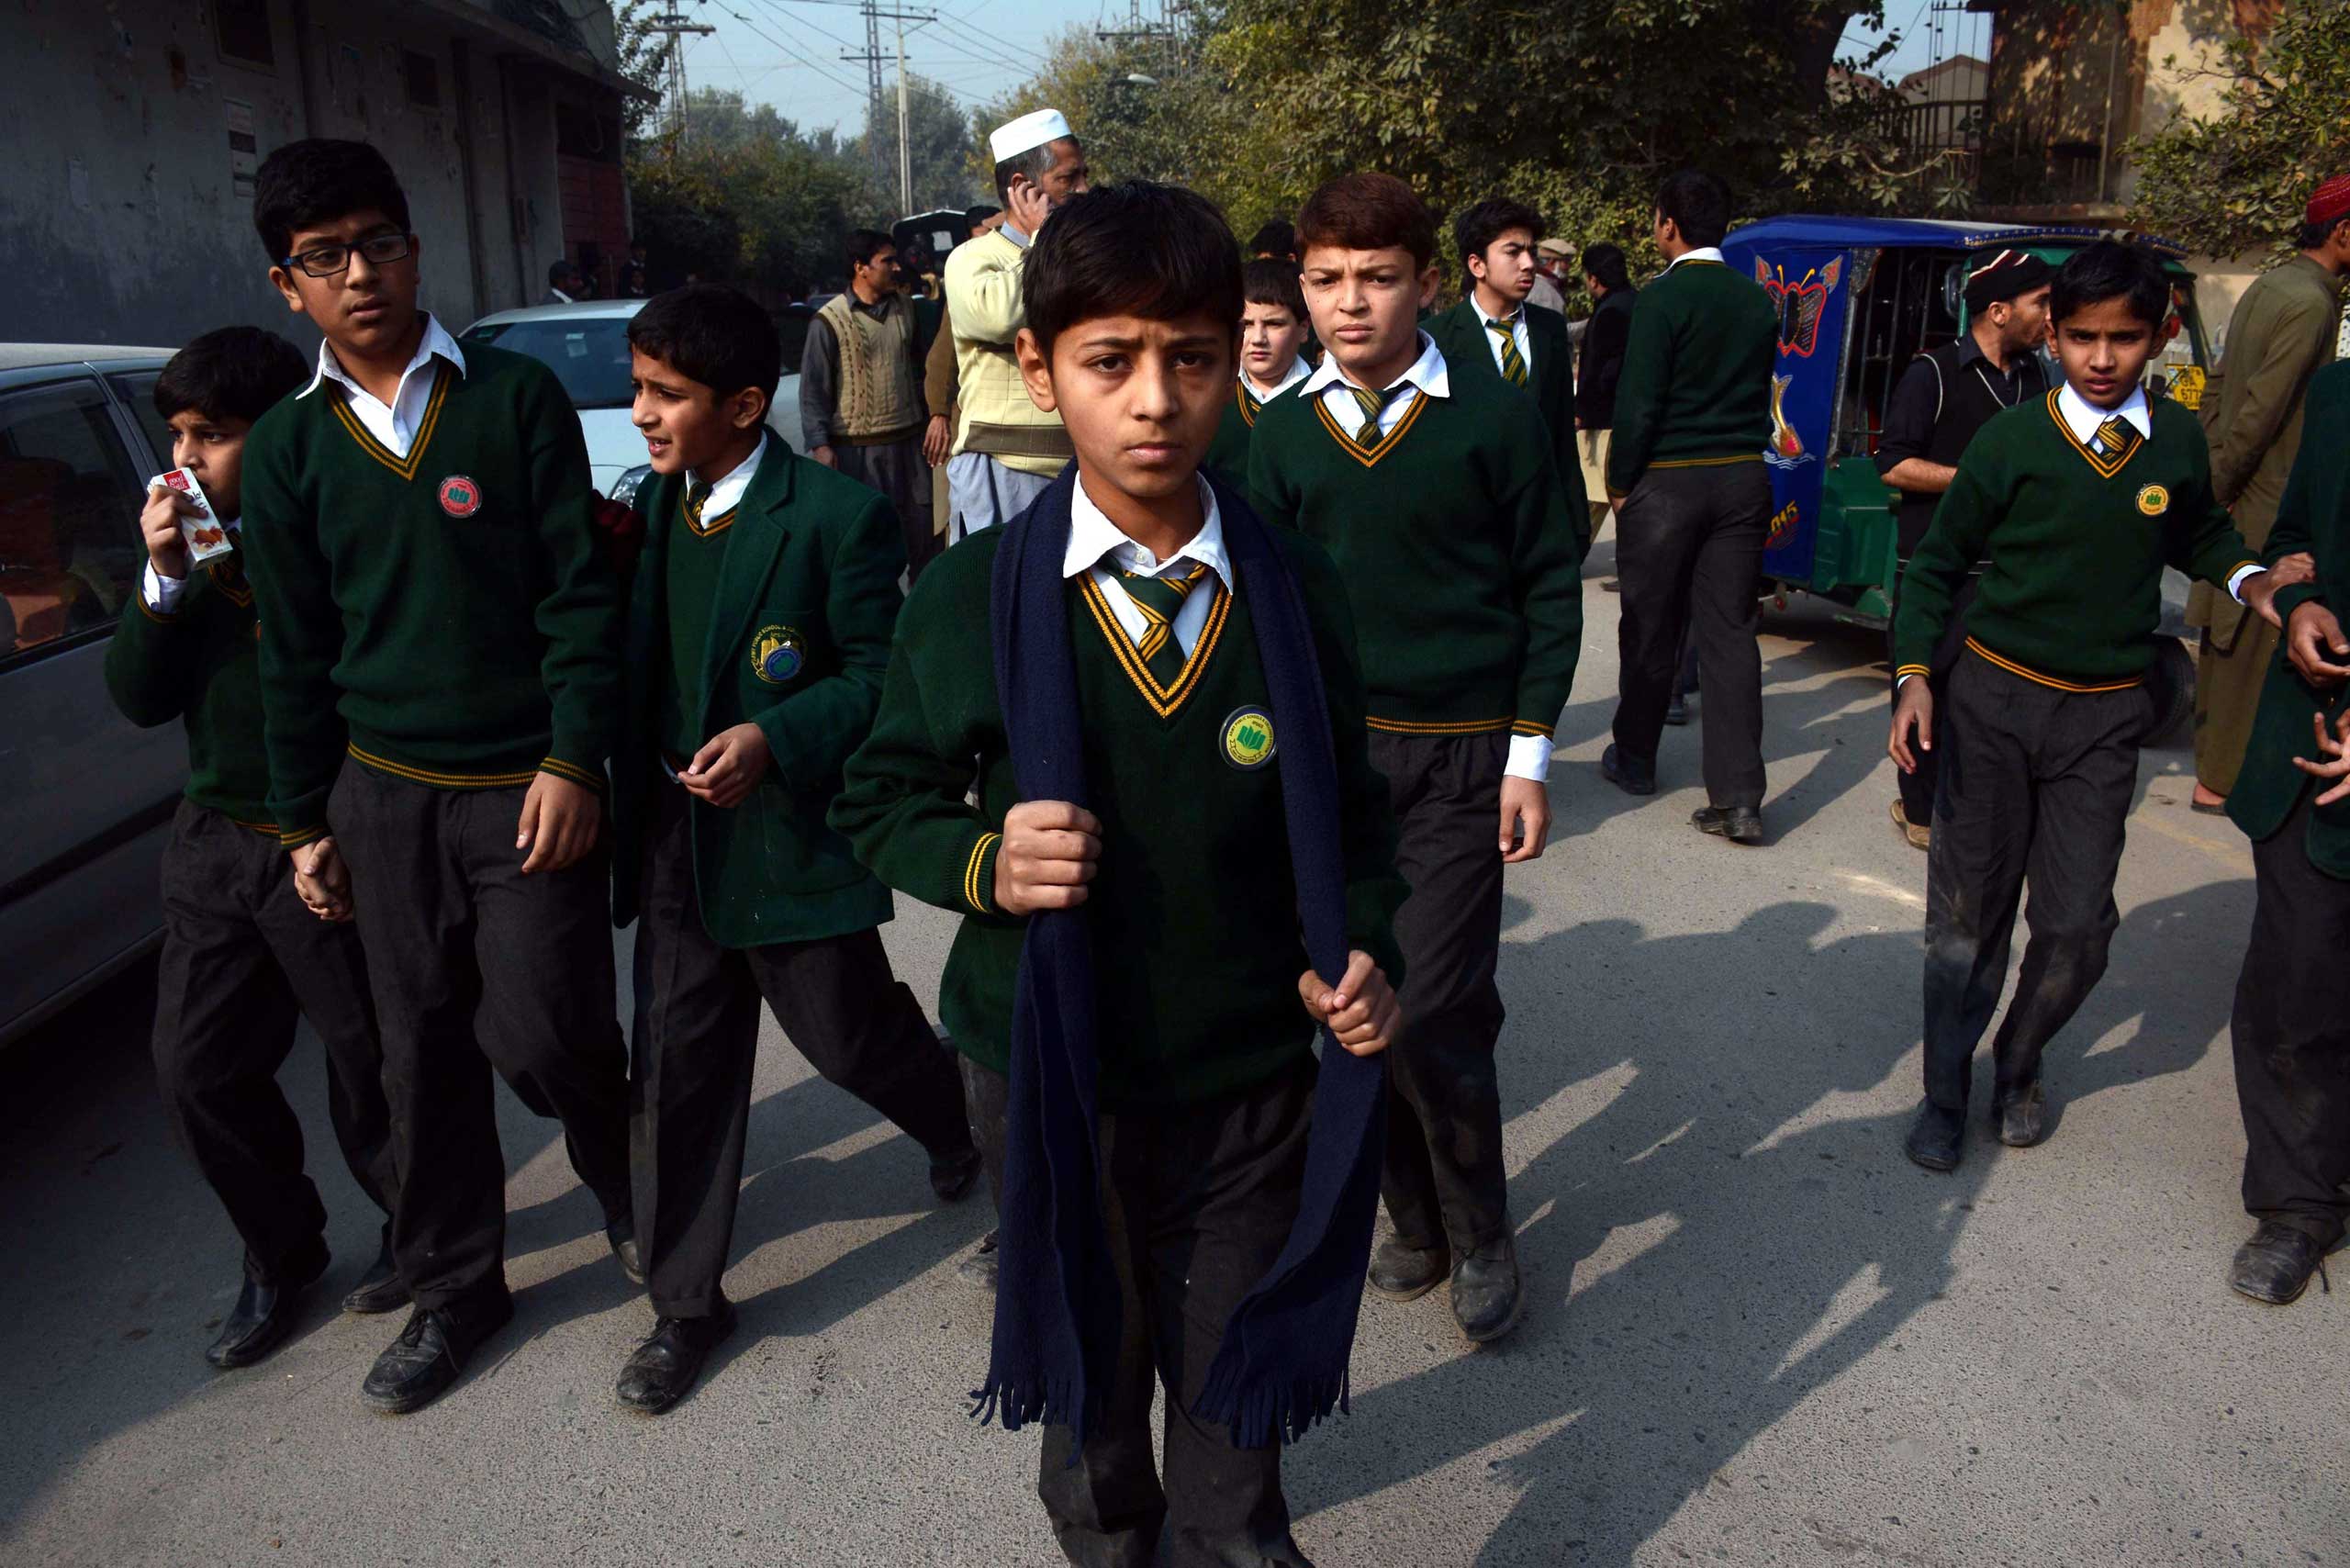 School children rescued by Pakistani security forces leave following an attack at the Army run school, in Peshawar on Dec. 16, 2014. (Bilawal Arbab—EPA)